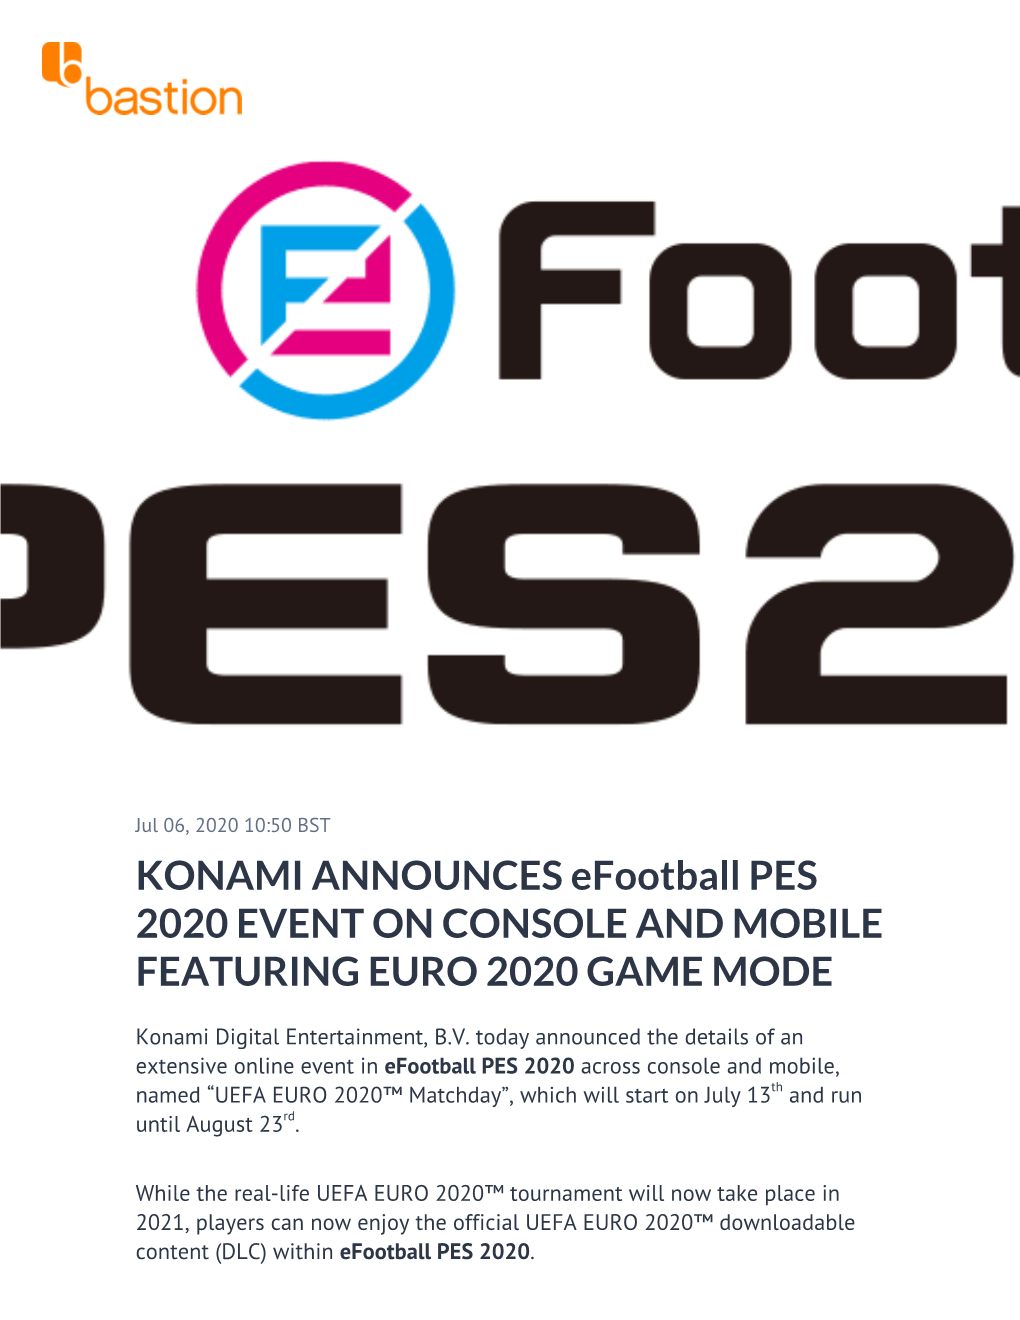 KONAMI ANNOUNCES Efootball PES 2020 EVENT on CONSOLE and MOBILE FEATURING EURO 2020 GAME MODE